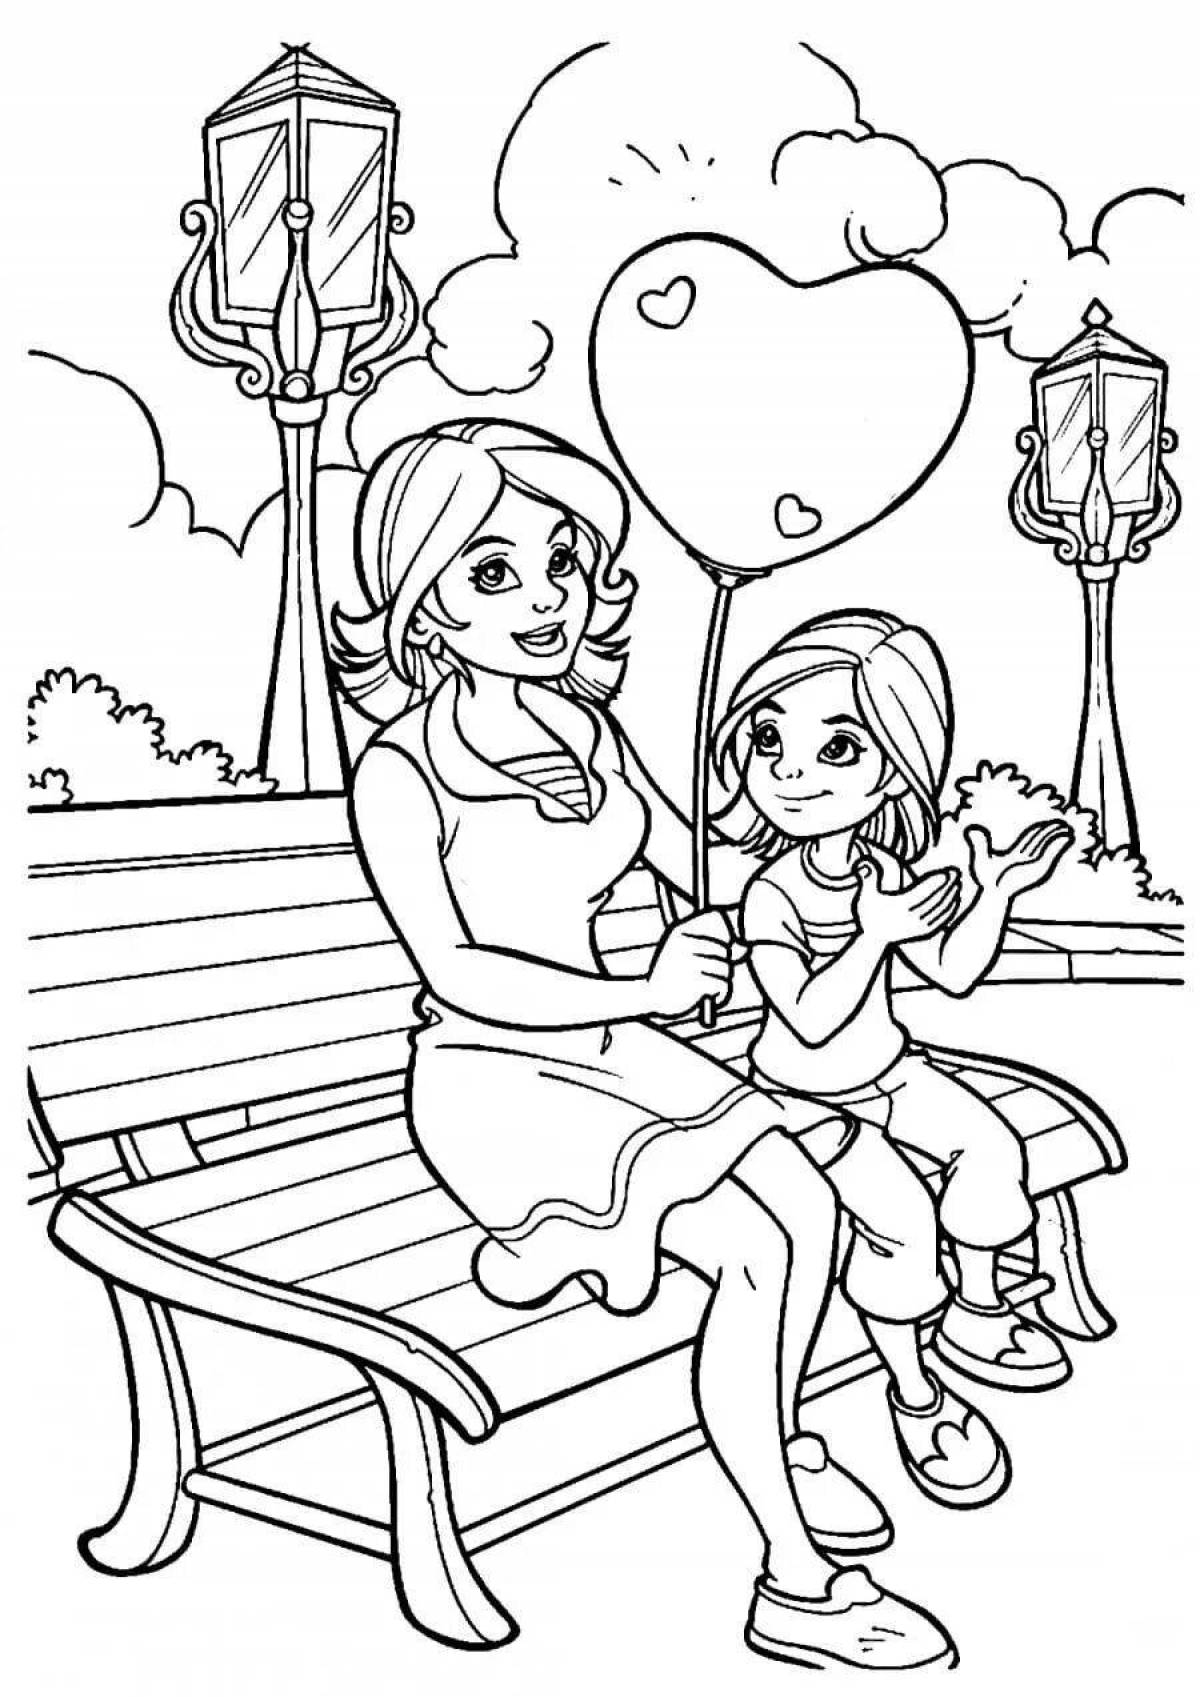 Gracious mother and baby coloring book